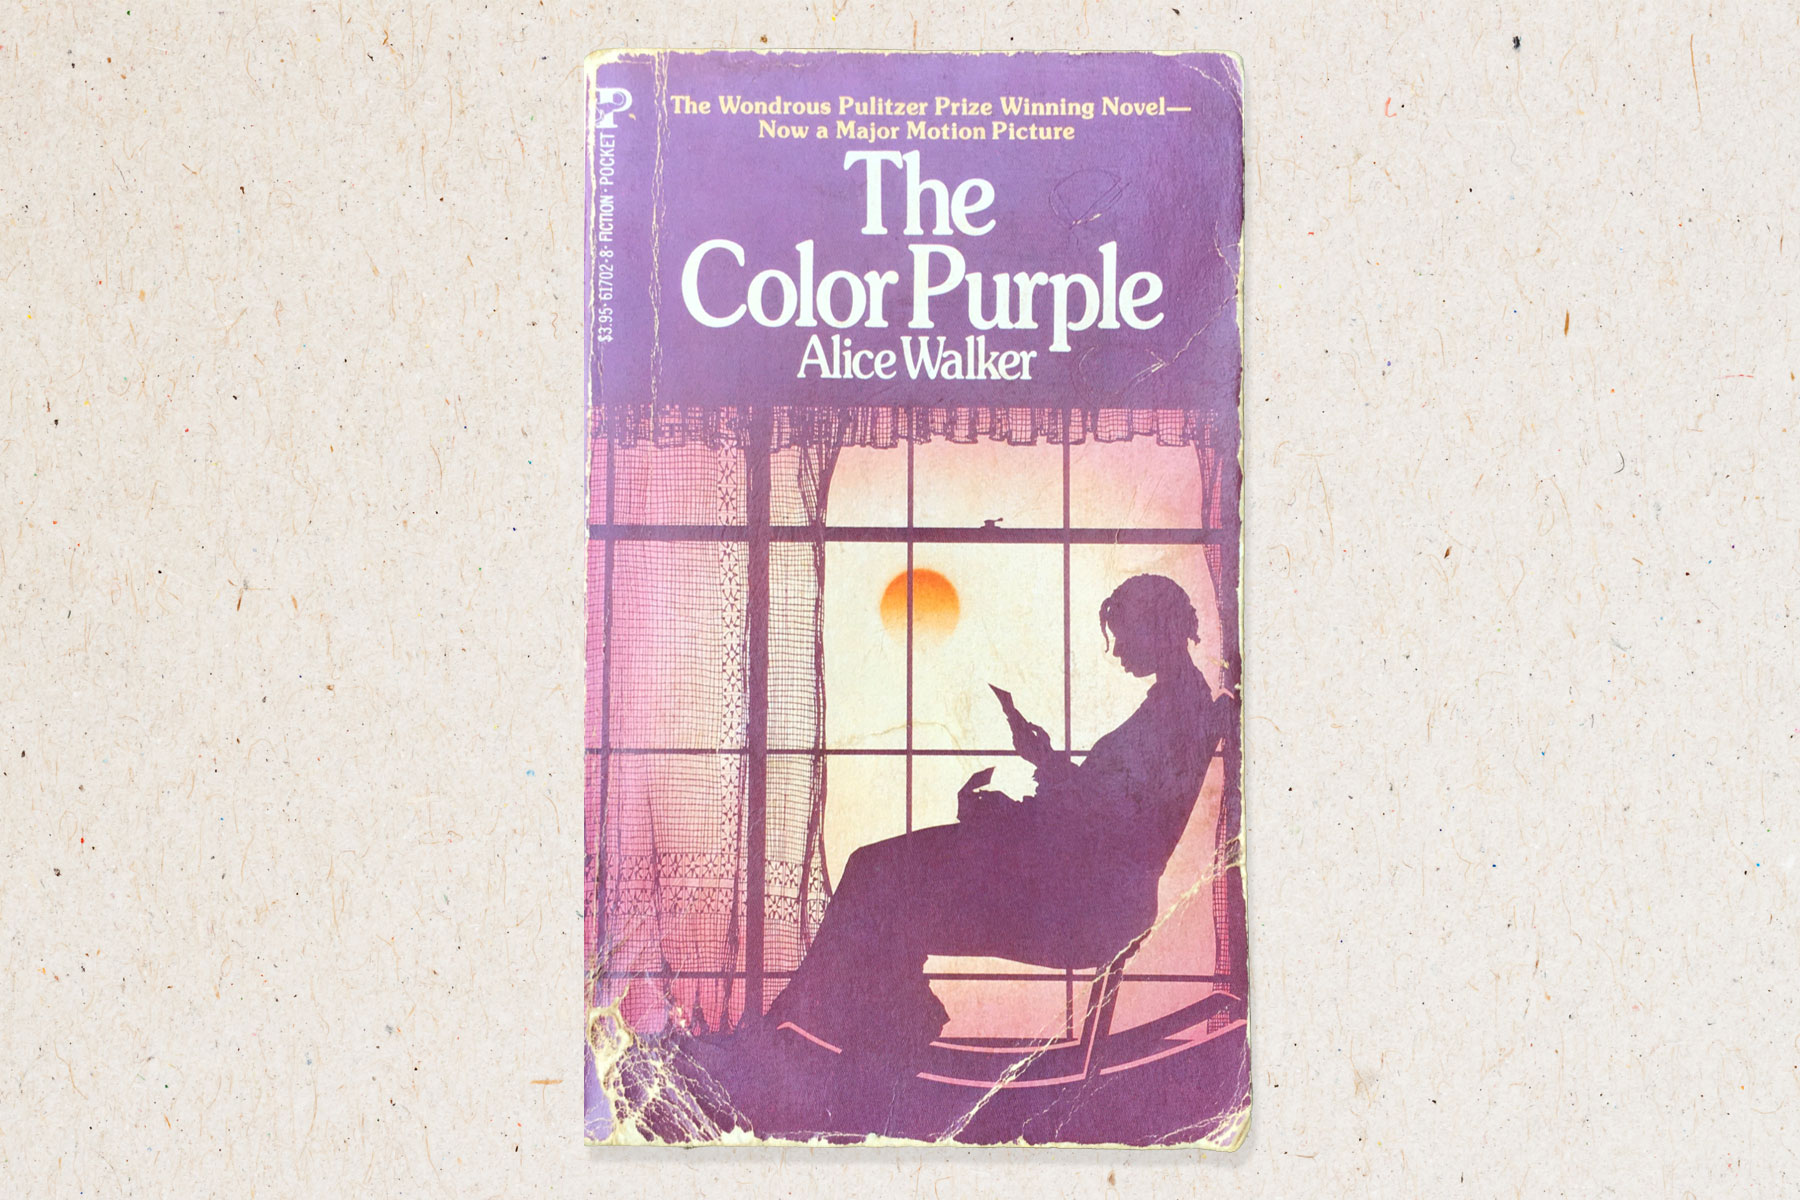 An image of the book, "The Color Purple."